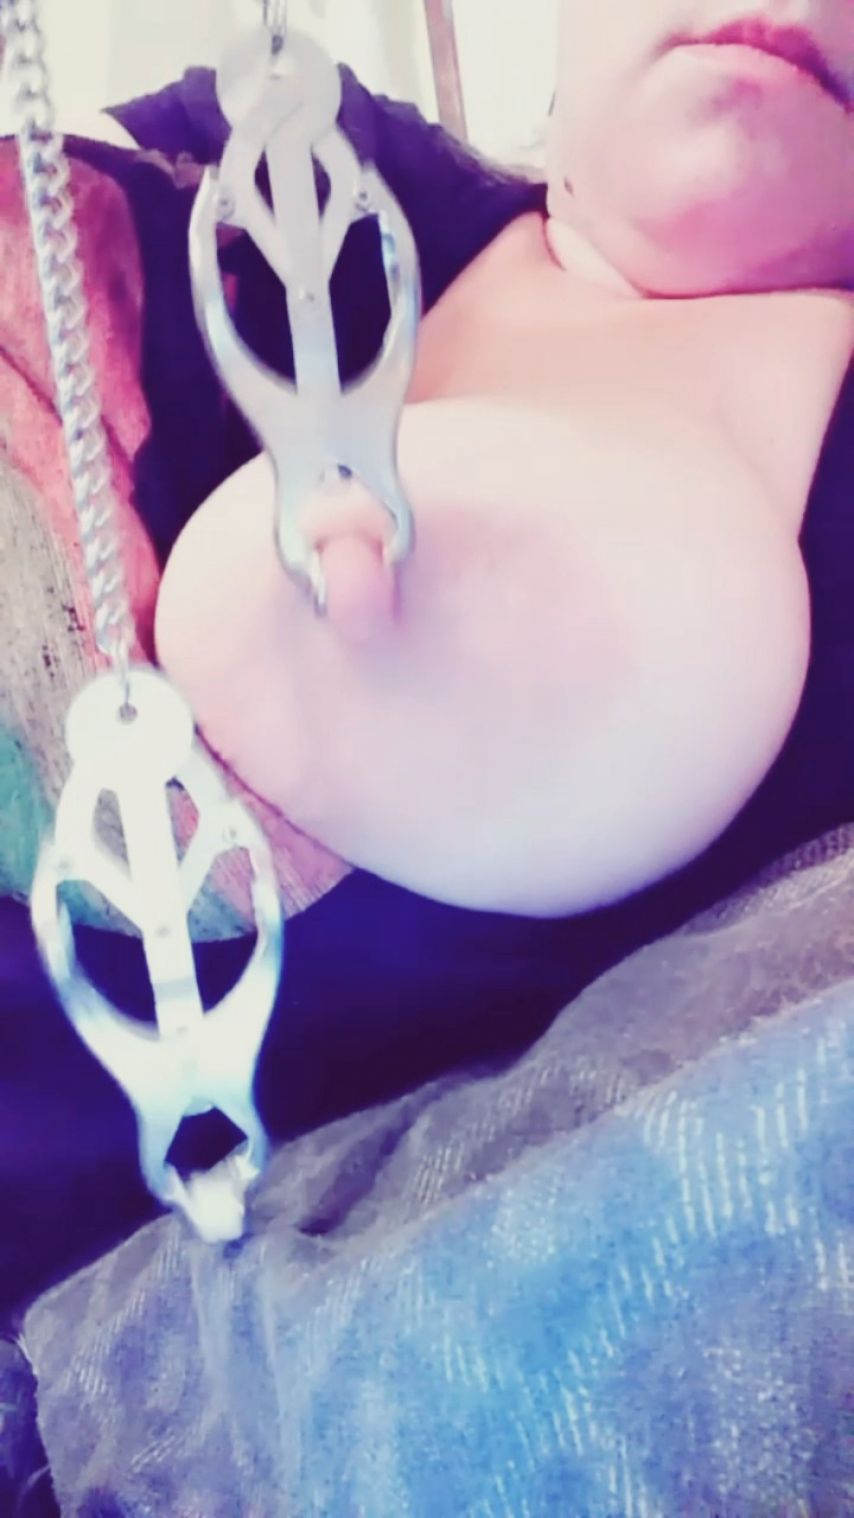 Clover Clamps, Nipple Play, and 40DD's